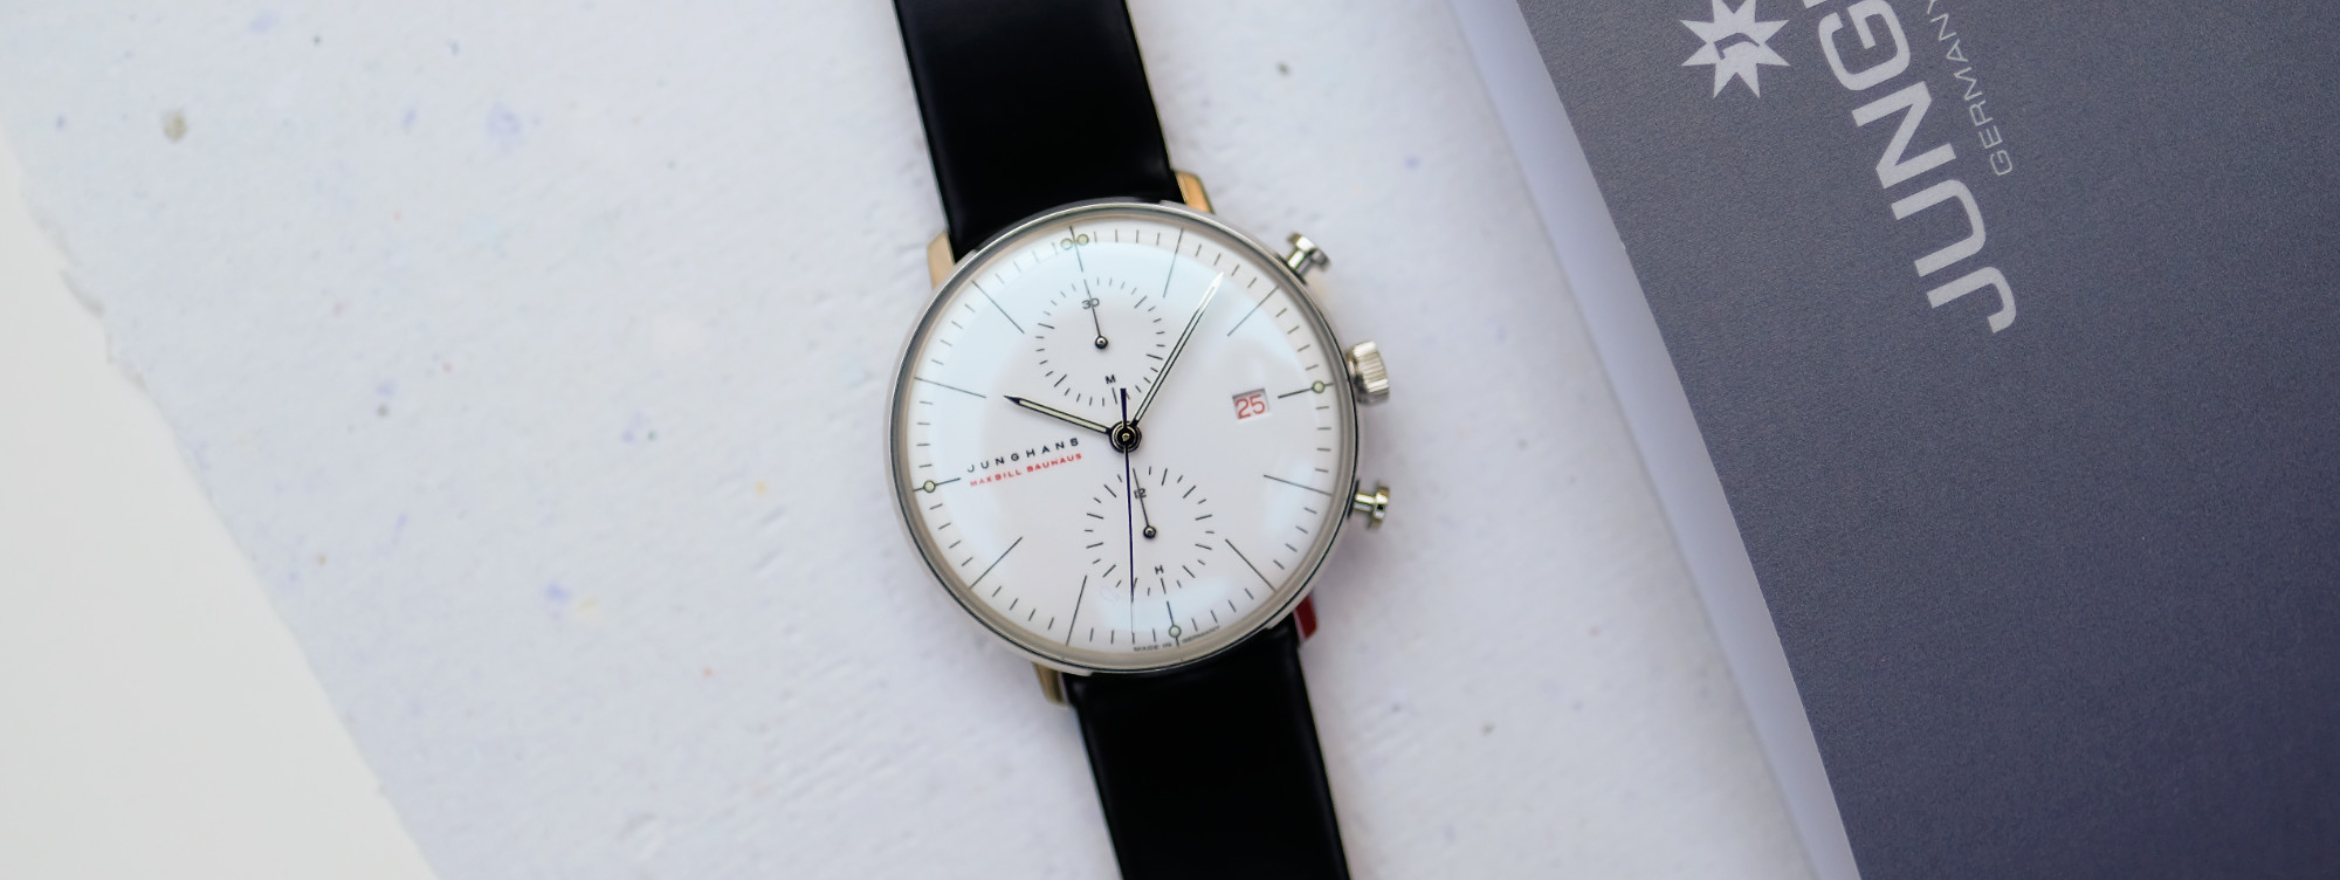 100 Years of Bauhaus with Junghans